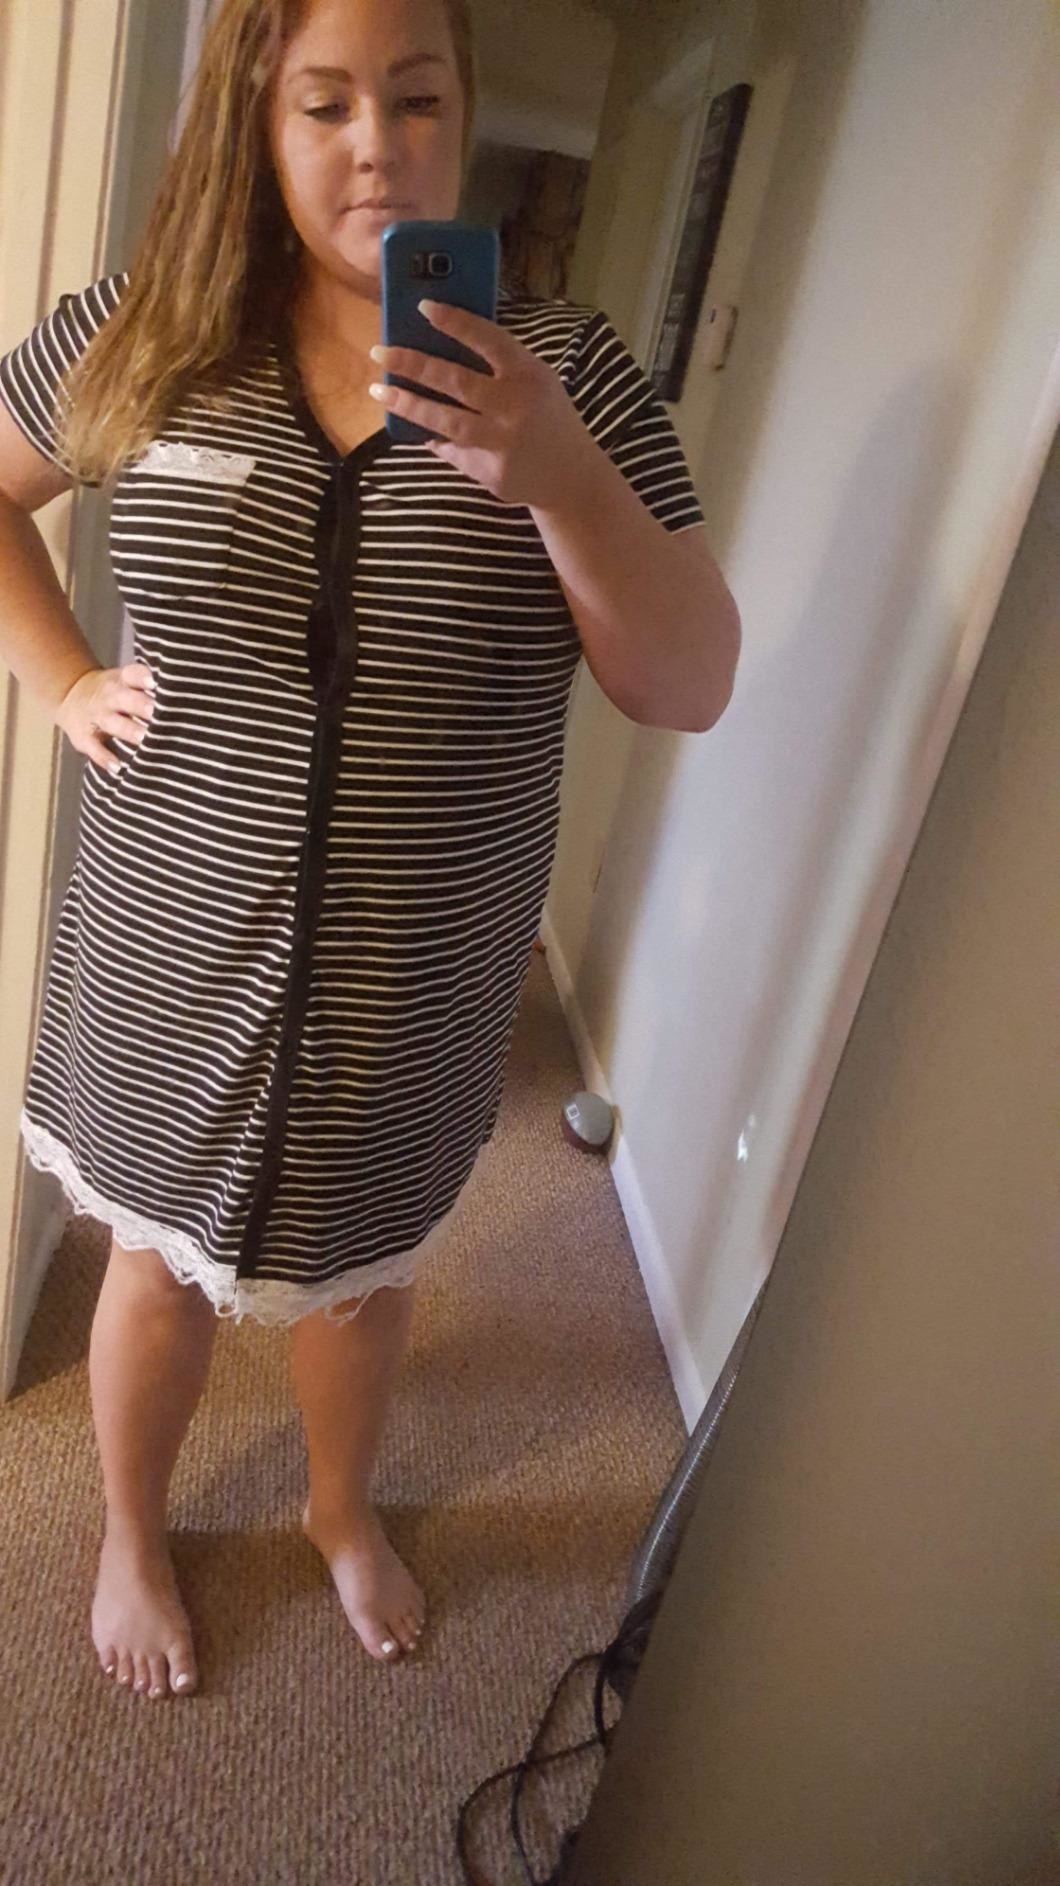 reviewer mirror selfie wearing black and white striped nightgown